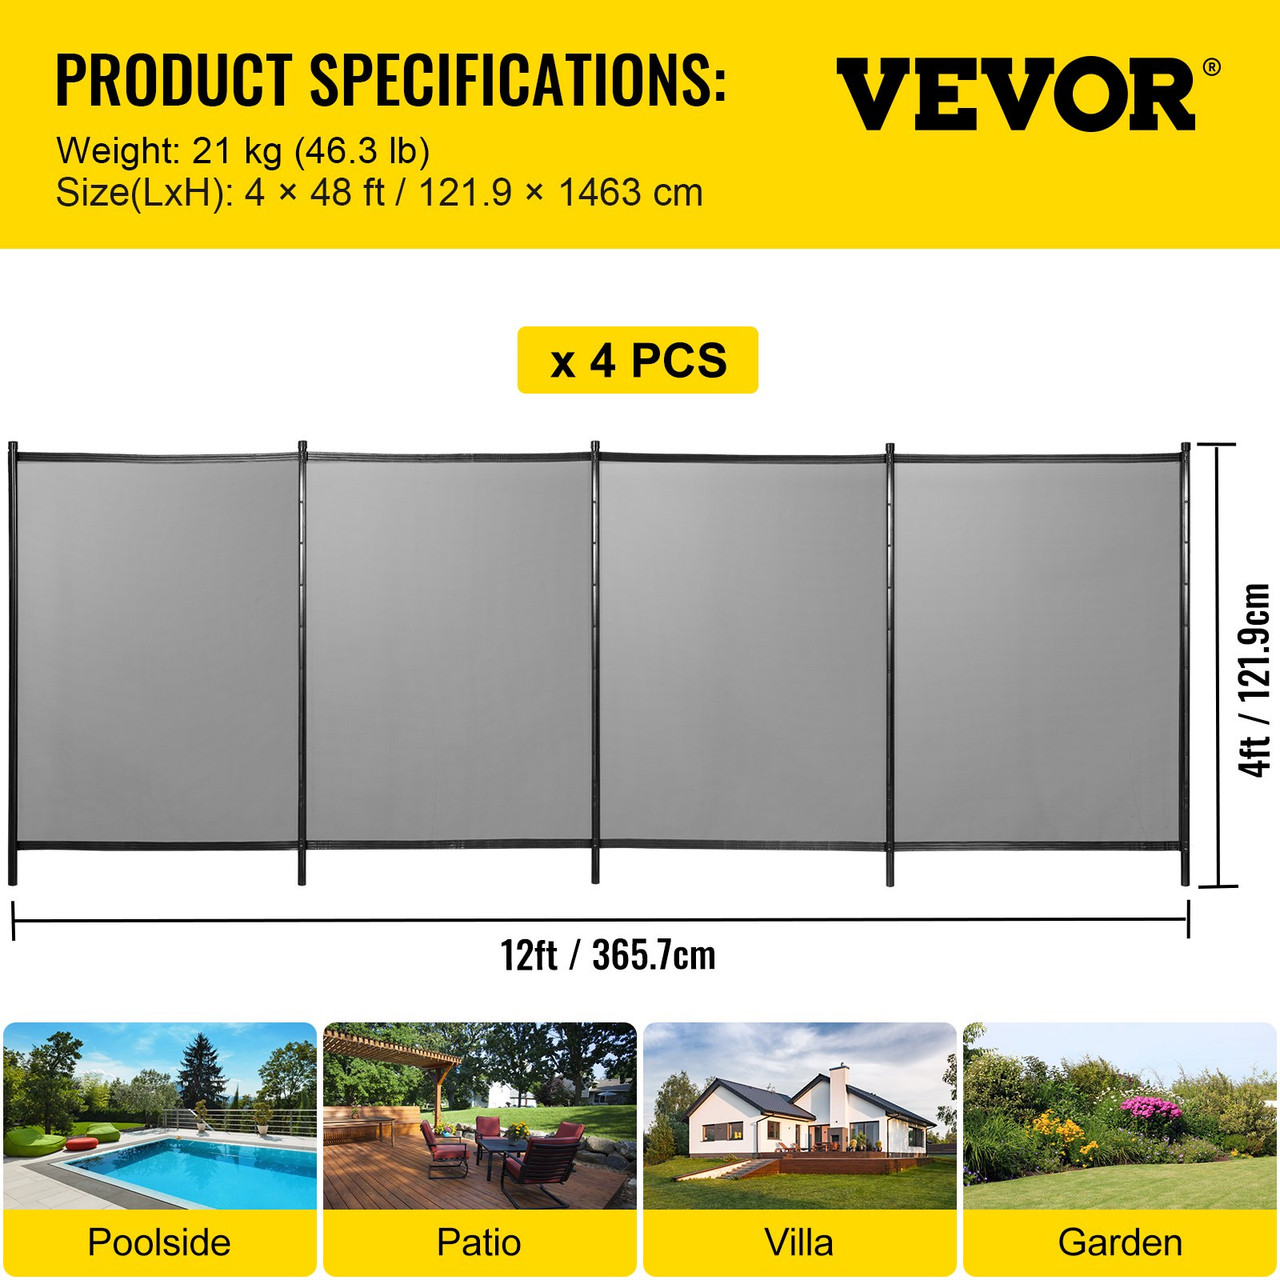 VEVOR Sentry Security Pool Fence 4x48 ft Removable Pool Fence Hole Size 1.1x 3.5 in Pool Fences for In-ground Pools 44 Sleeves Pool Fence DIY by Life Saver Fencing Section Kit Black